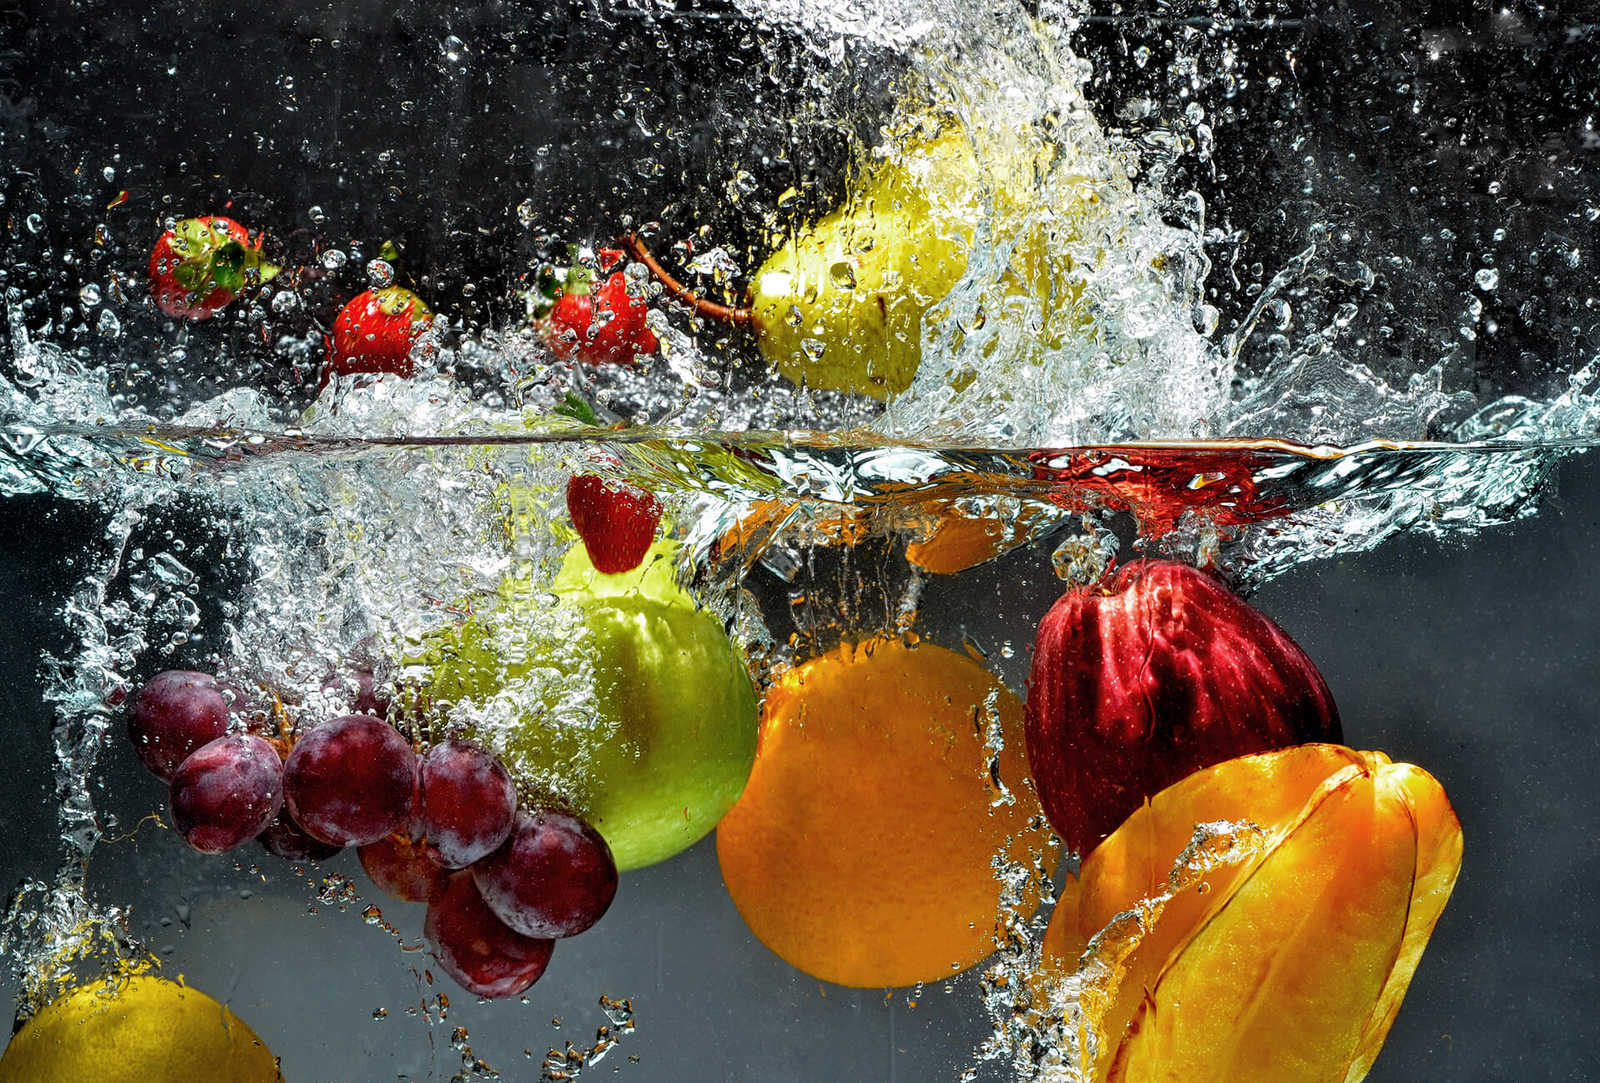         Photo wallpaper fresh fruit and water - colourful, yellow, red
    